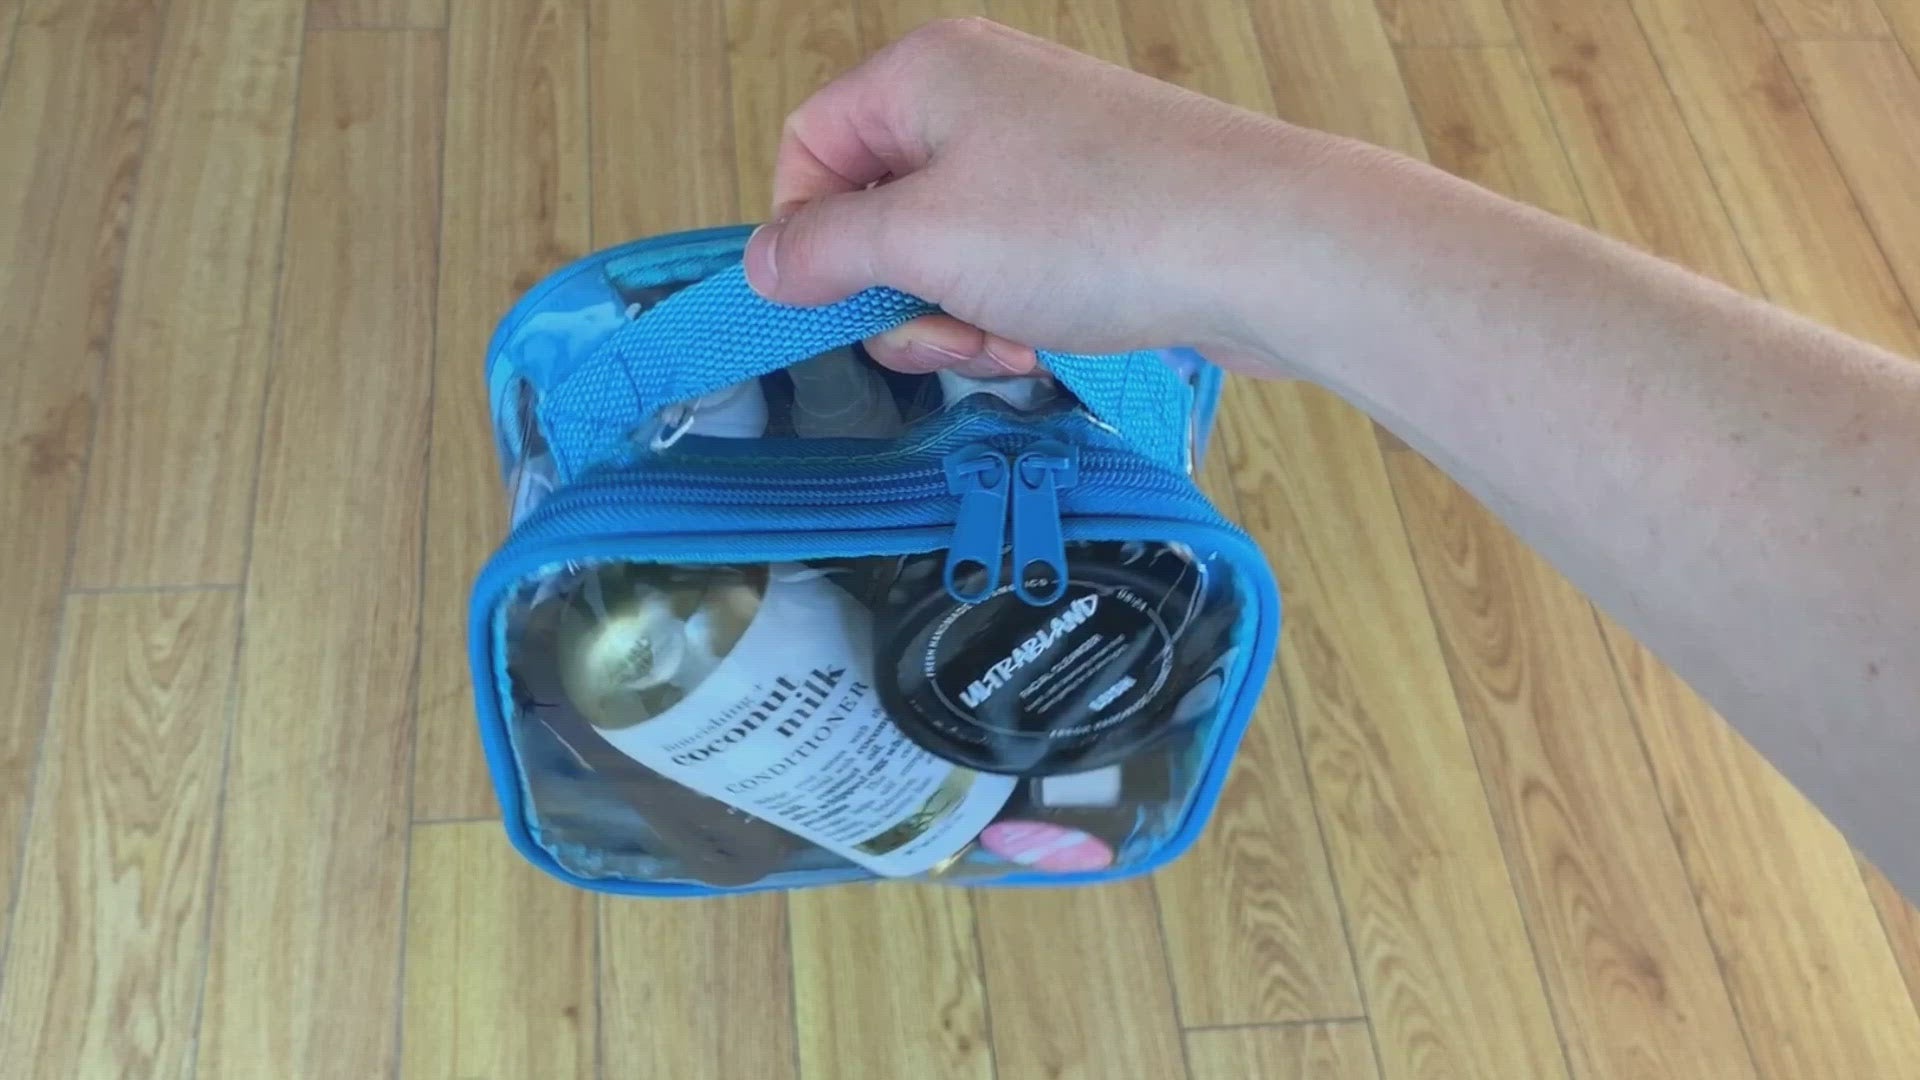 How much can you stuff into a one quart bag when passing through airport  security? – Peg's Blog